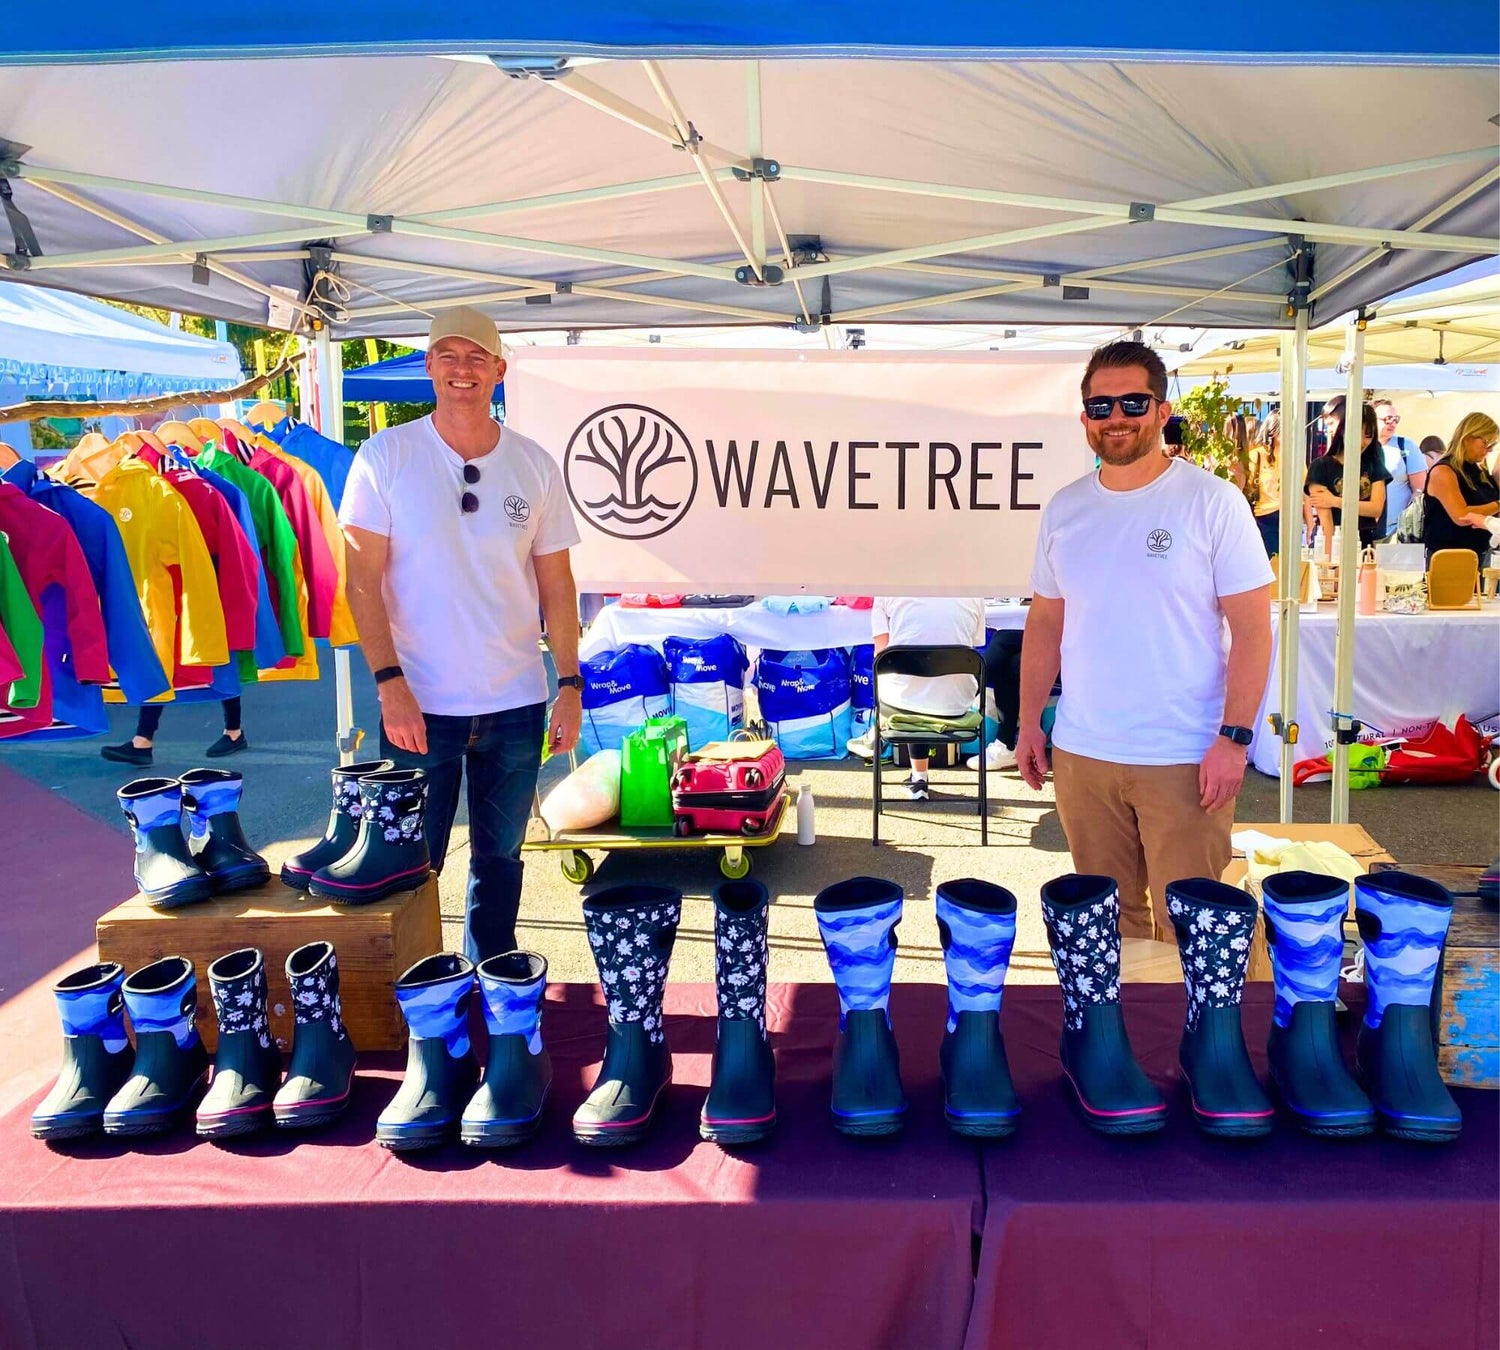 WAVETREE at the weekend markets